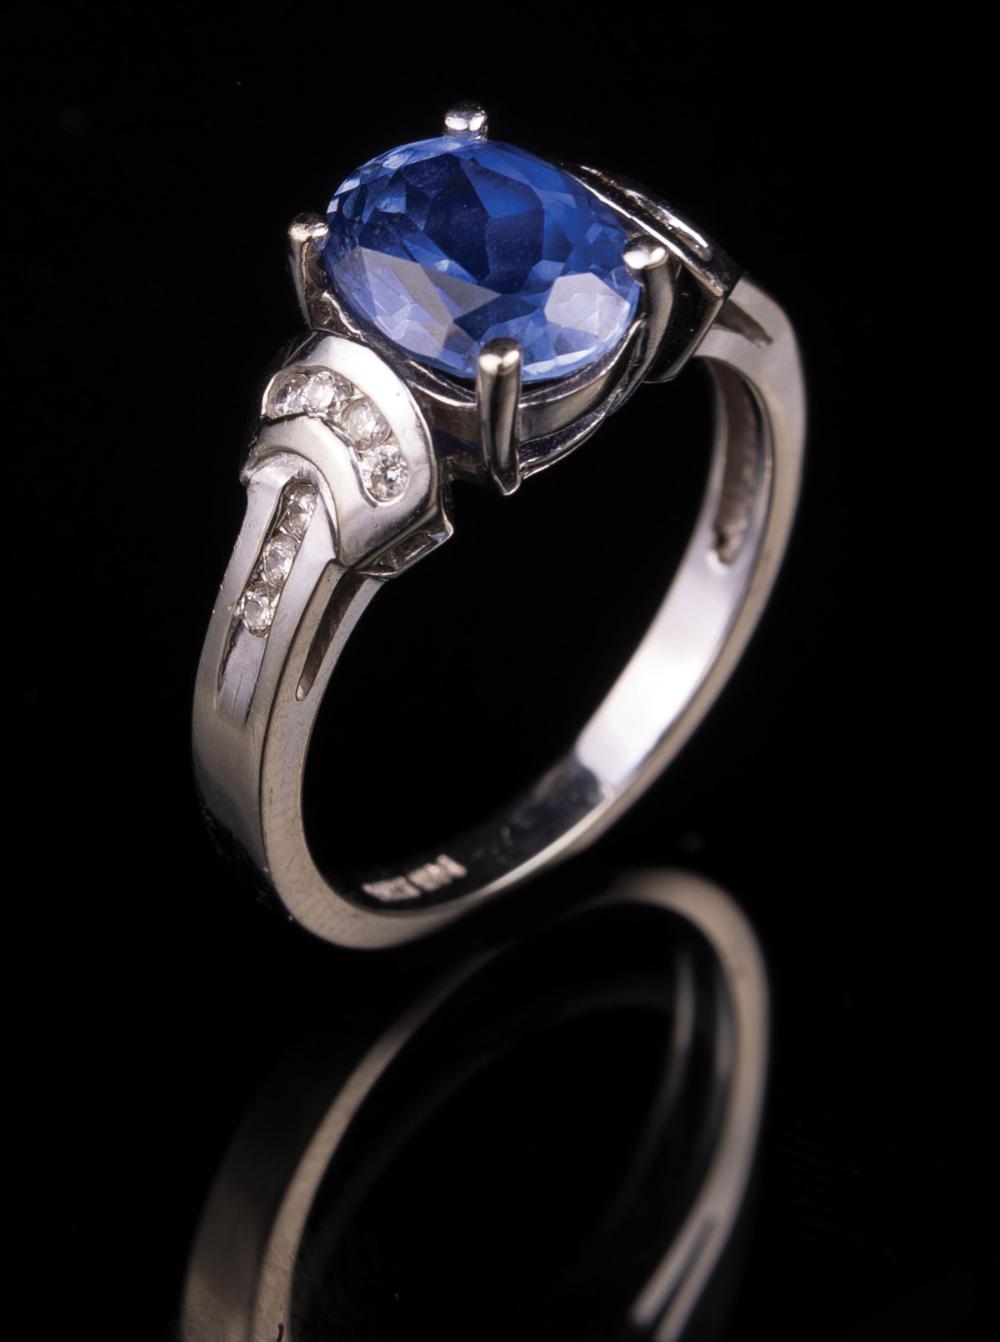 14 KT WHITE GOLD SAPPHIRE AND 31c095